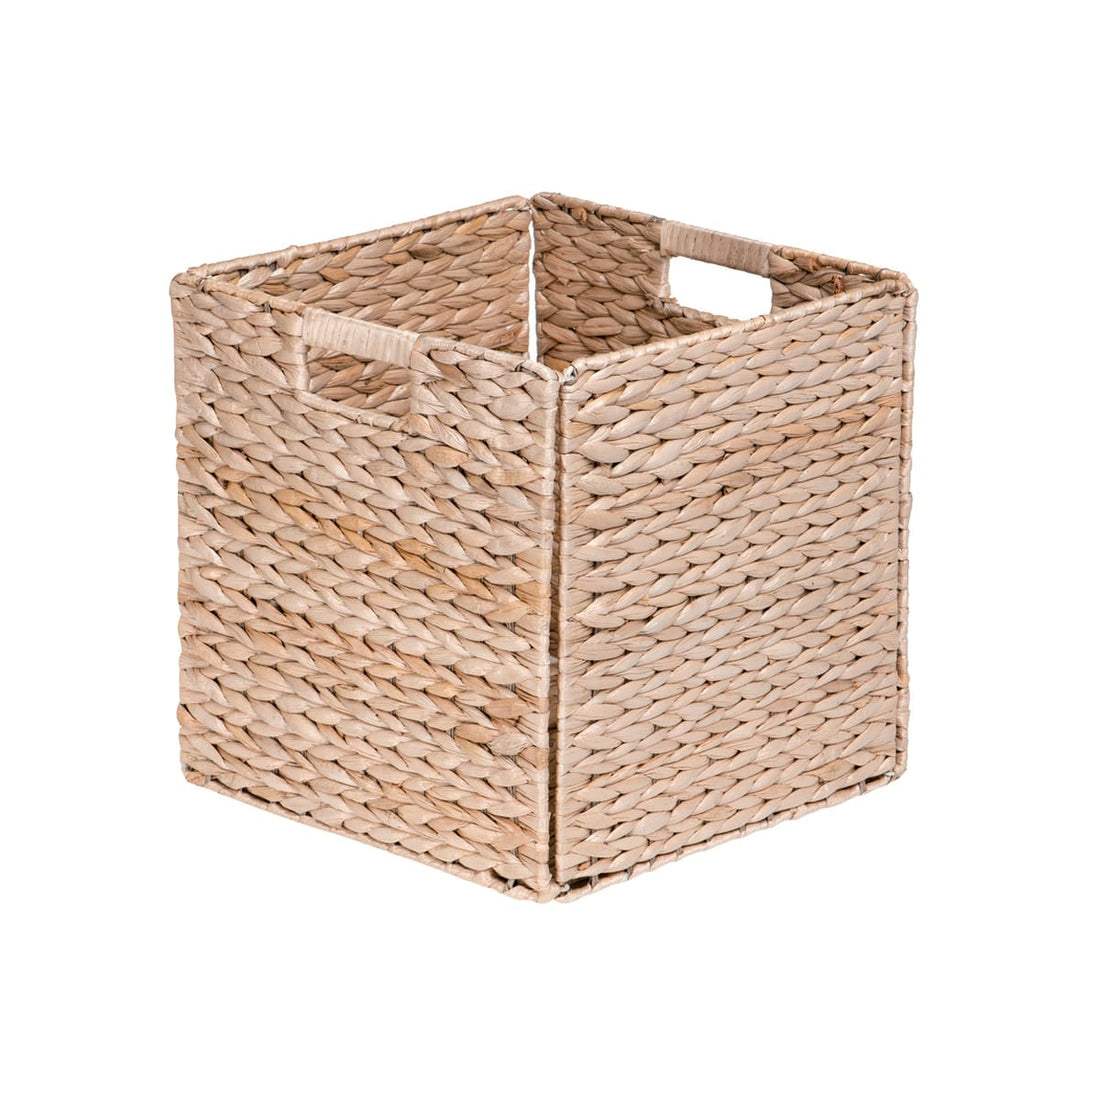 SPACEO KUB W31xD31xH31CM BASKET IN NATURAL MIDOLLINE